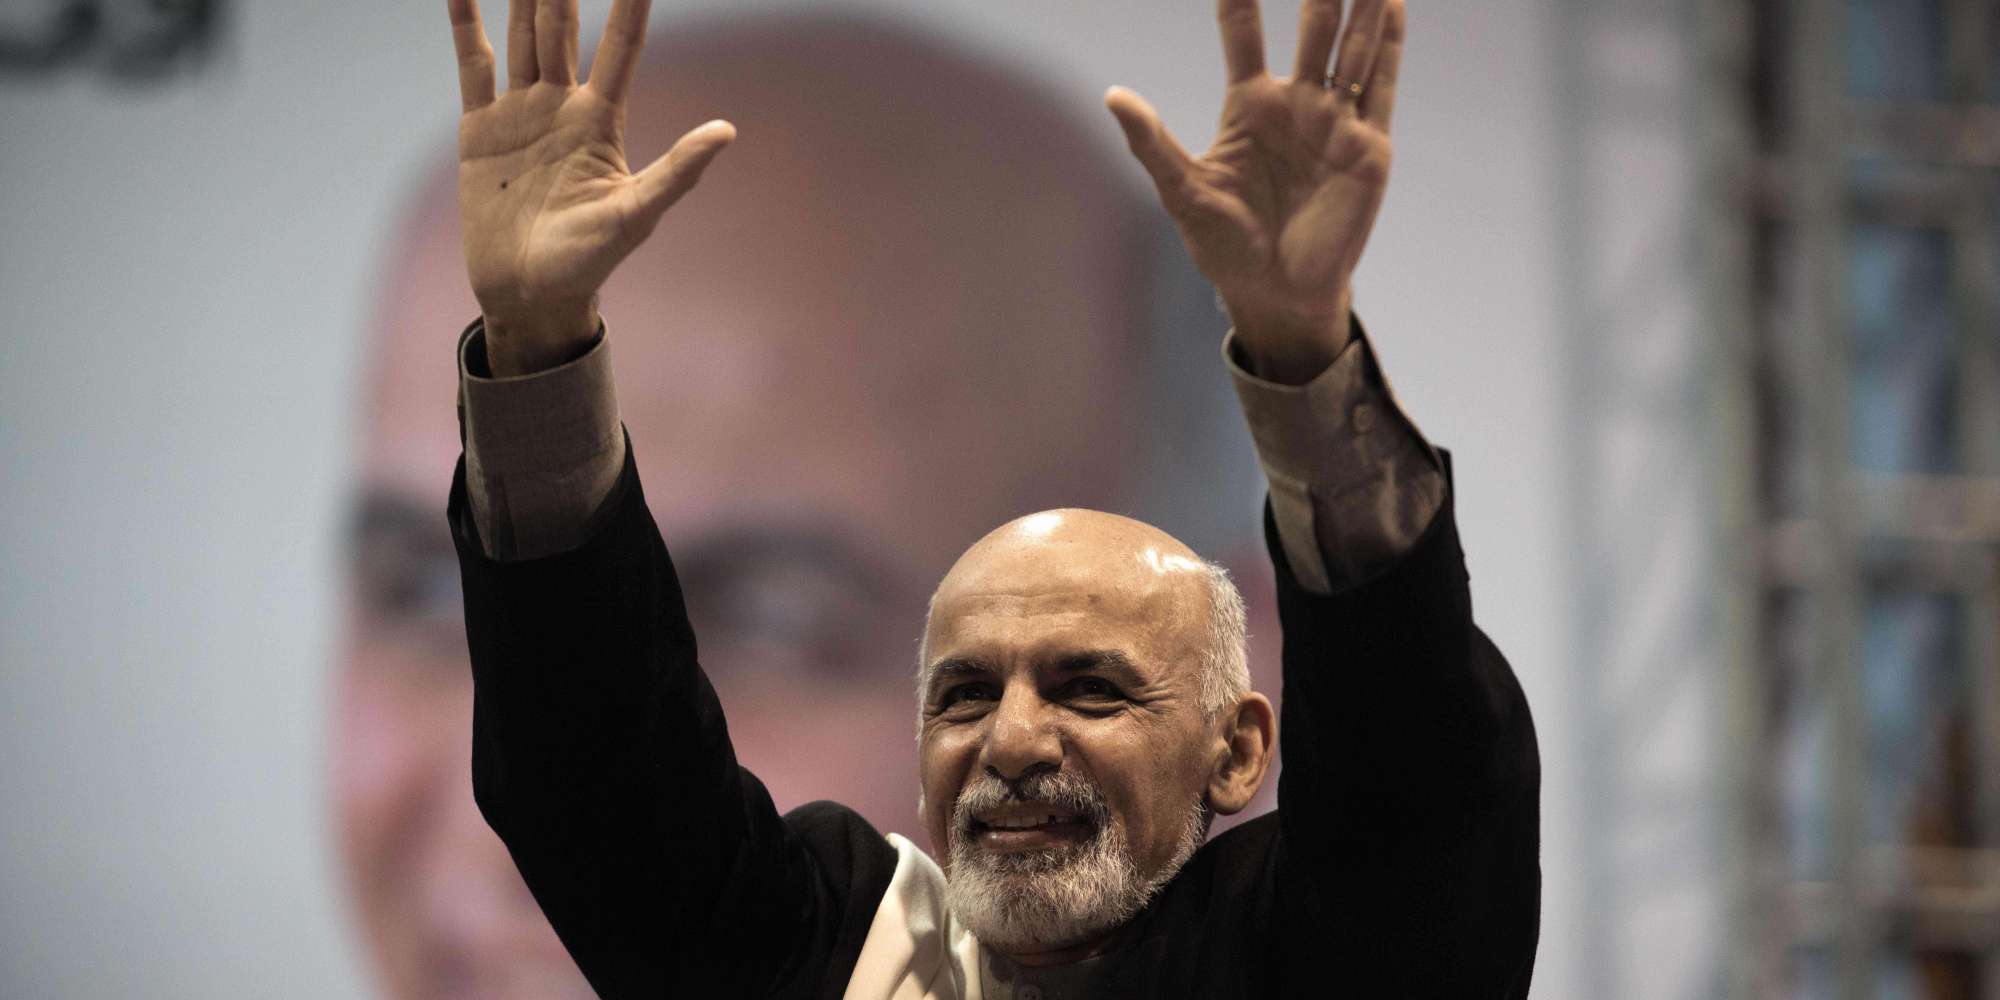 ashraf ghani quot we will be victorious in the second round are you ready for victory quot photo reuters file